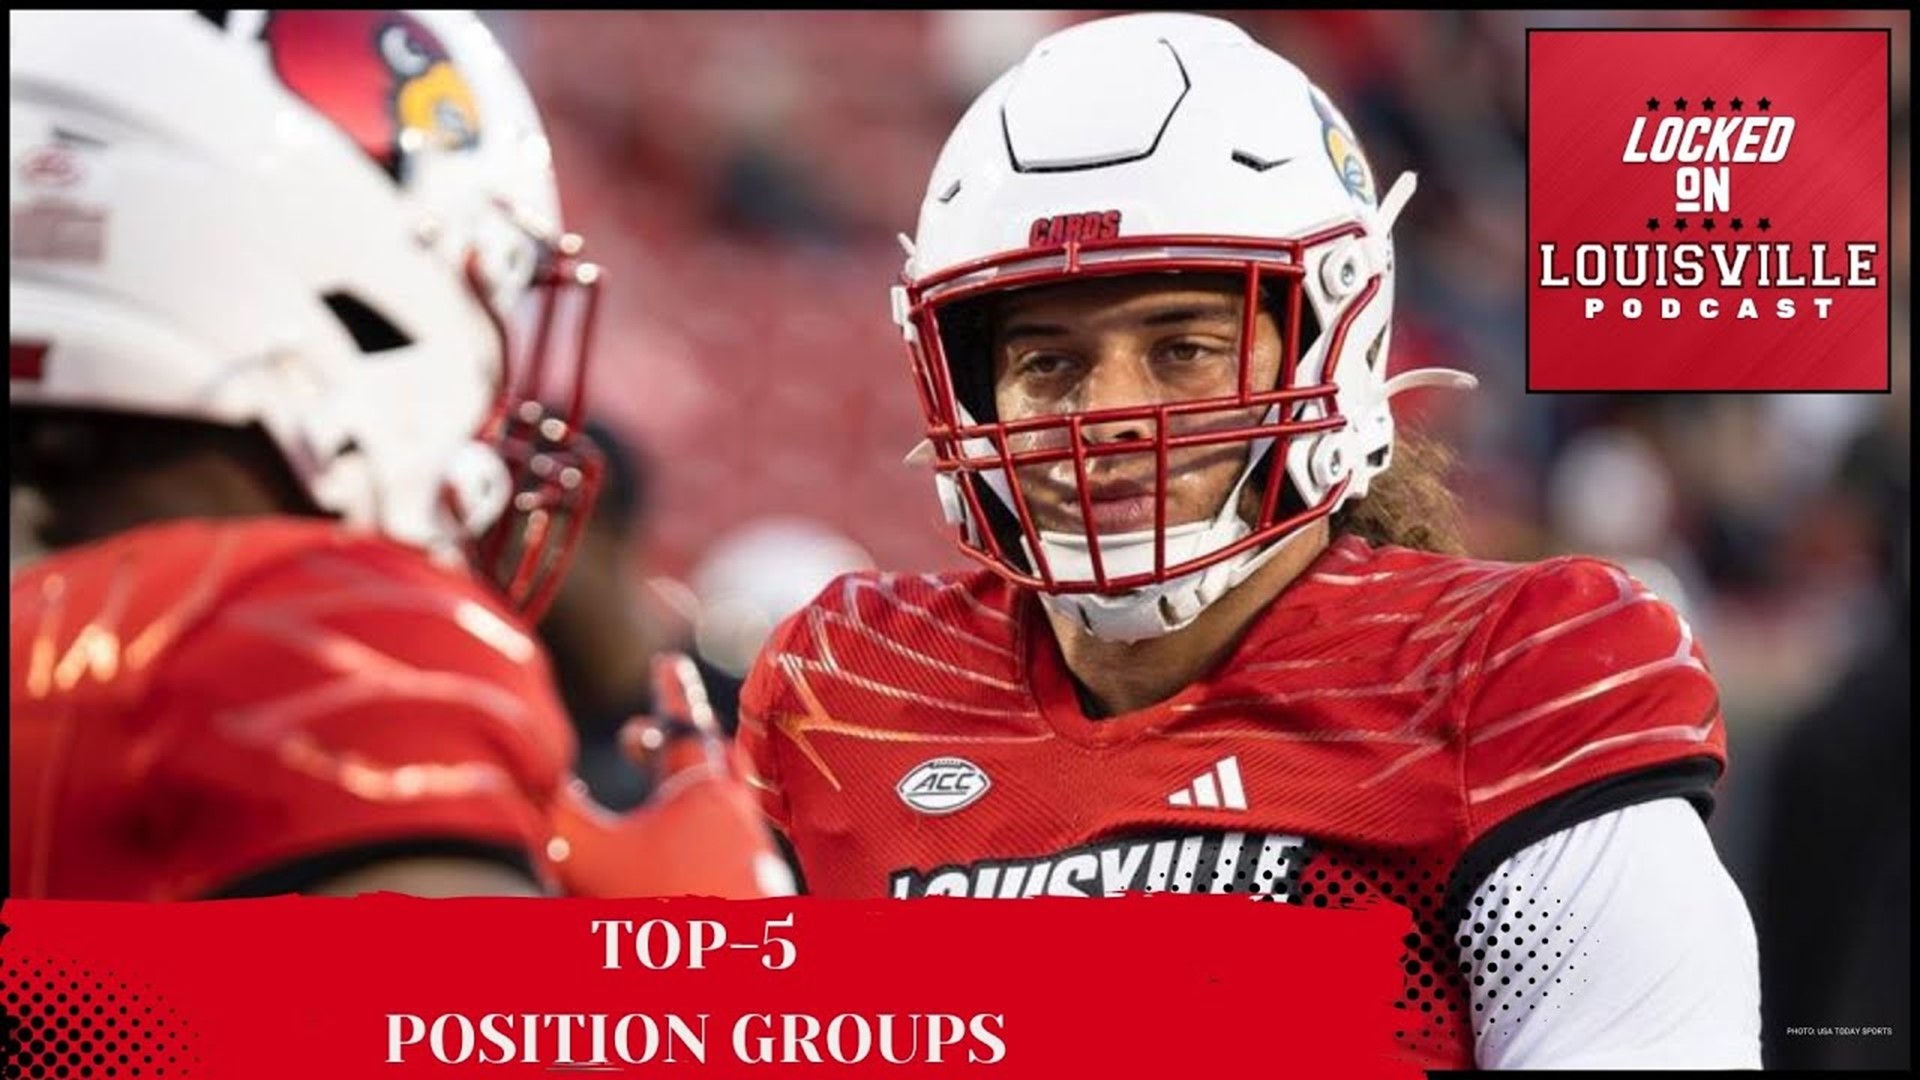 Louisville football: ranking the top-5 position groups ahead of spring practice